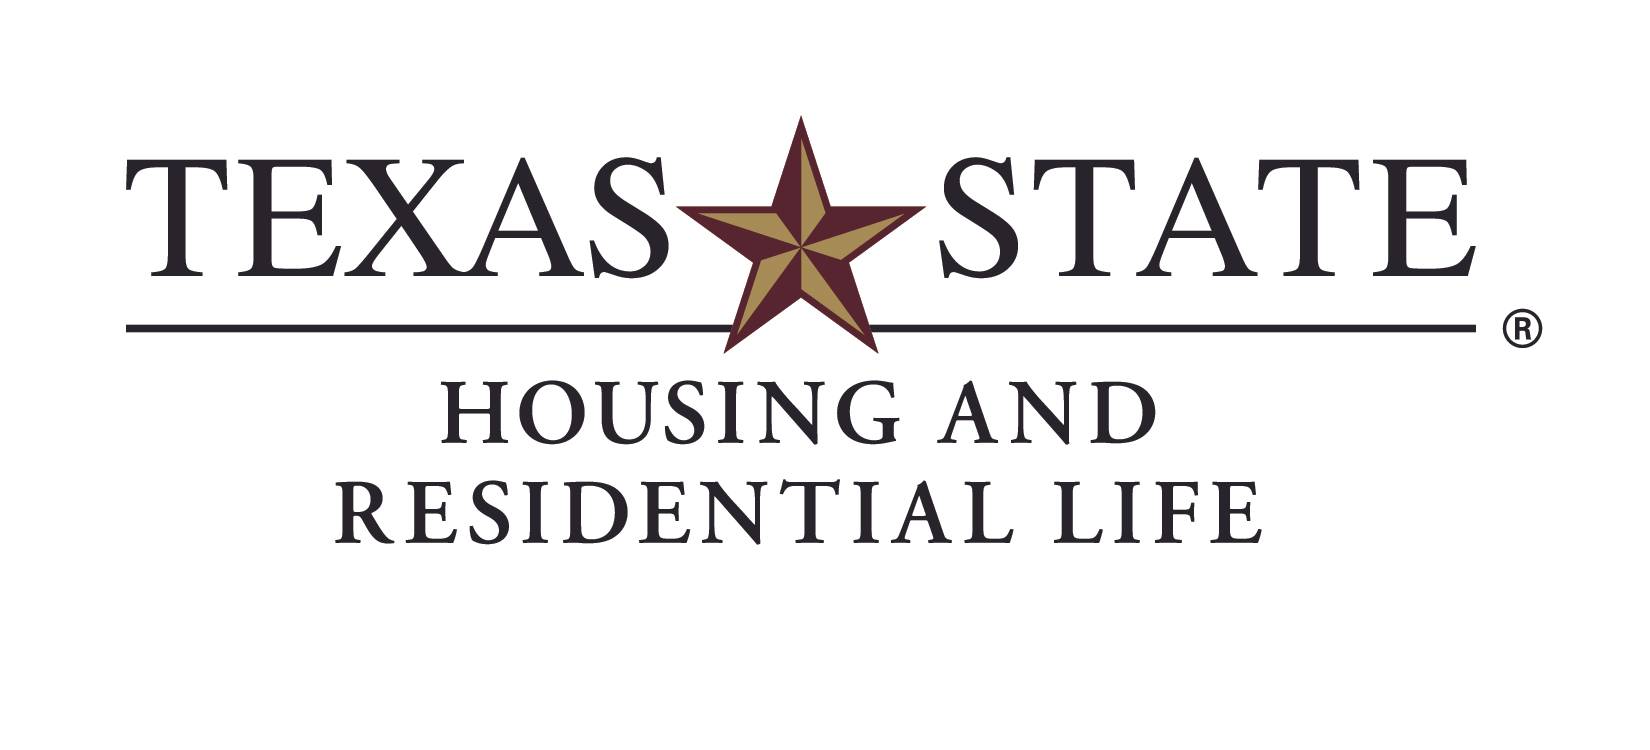 The TXST Department of Housing and Residential Life logo